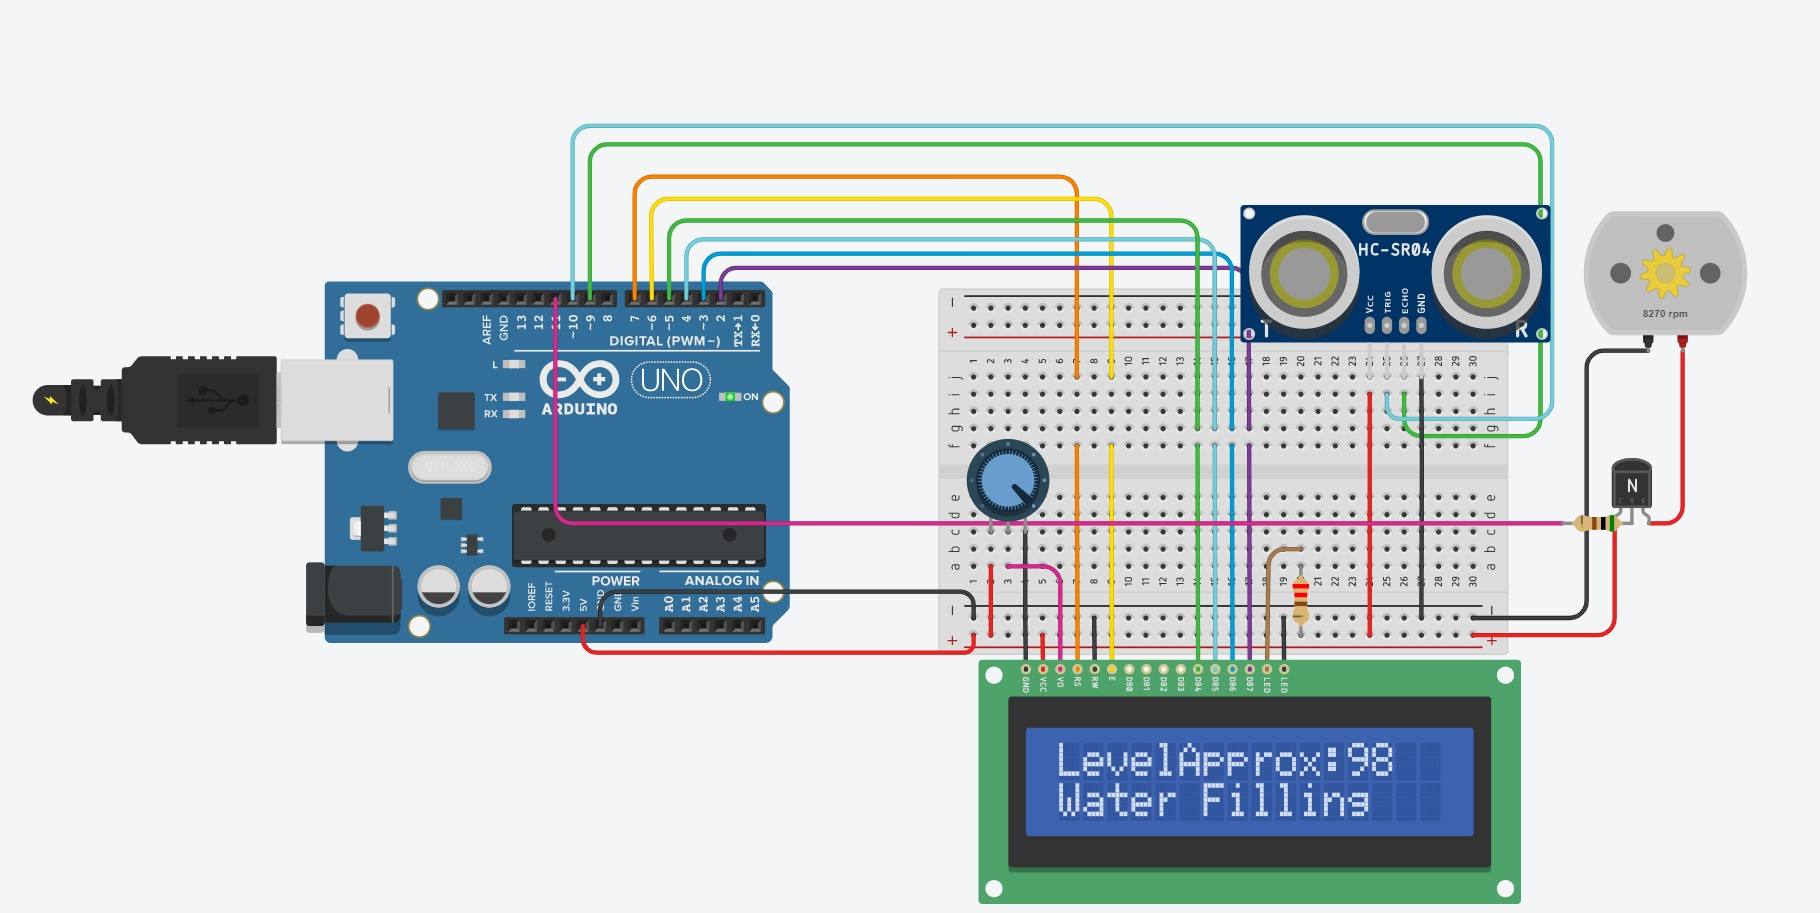 Water level indicator and pump controller using arduino